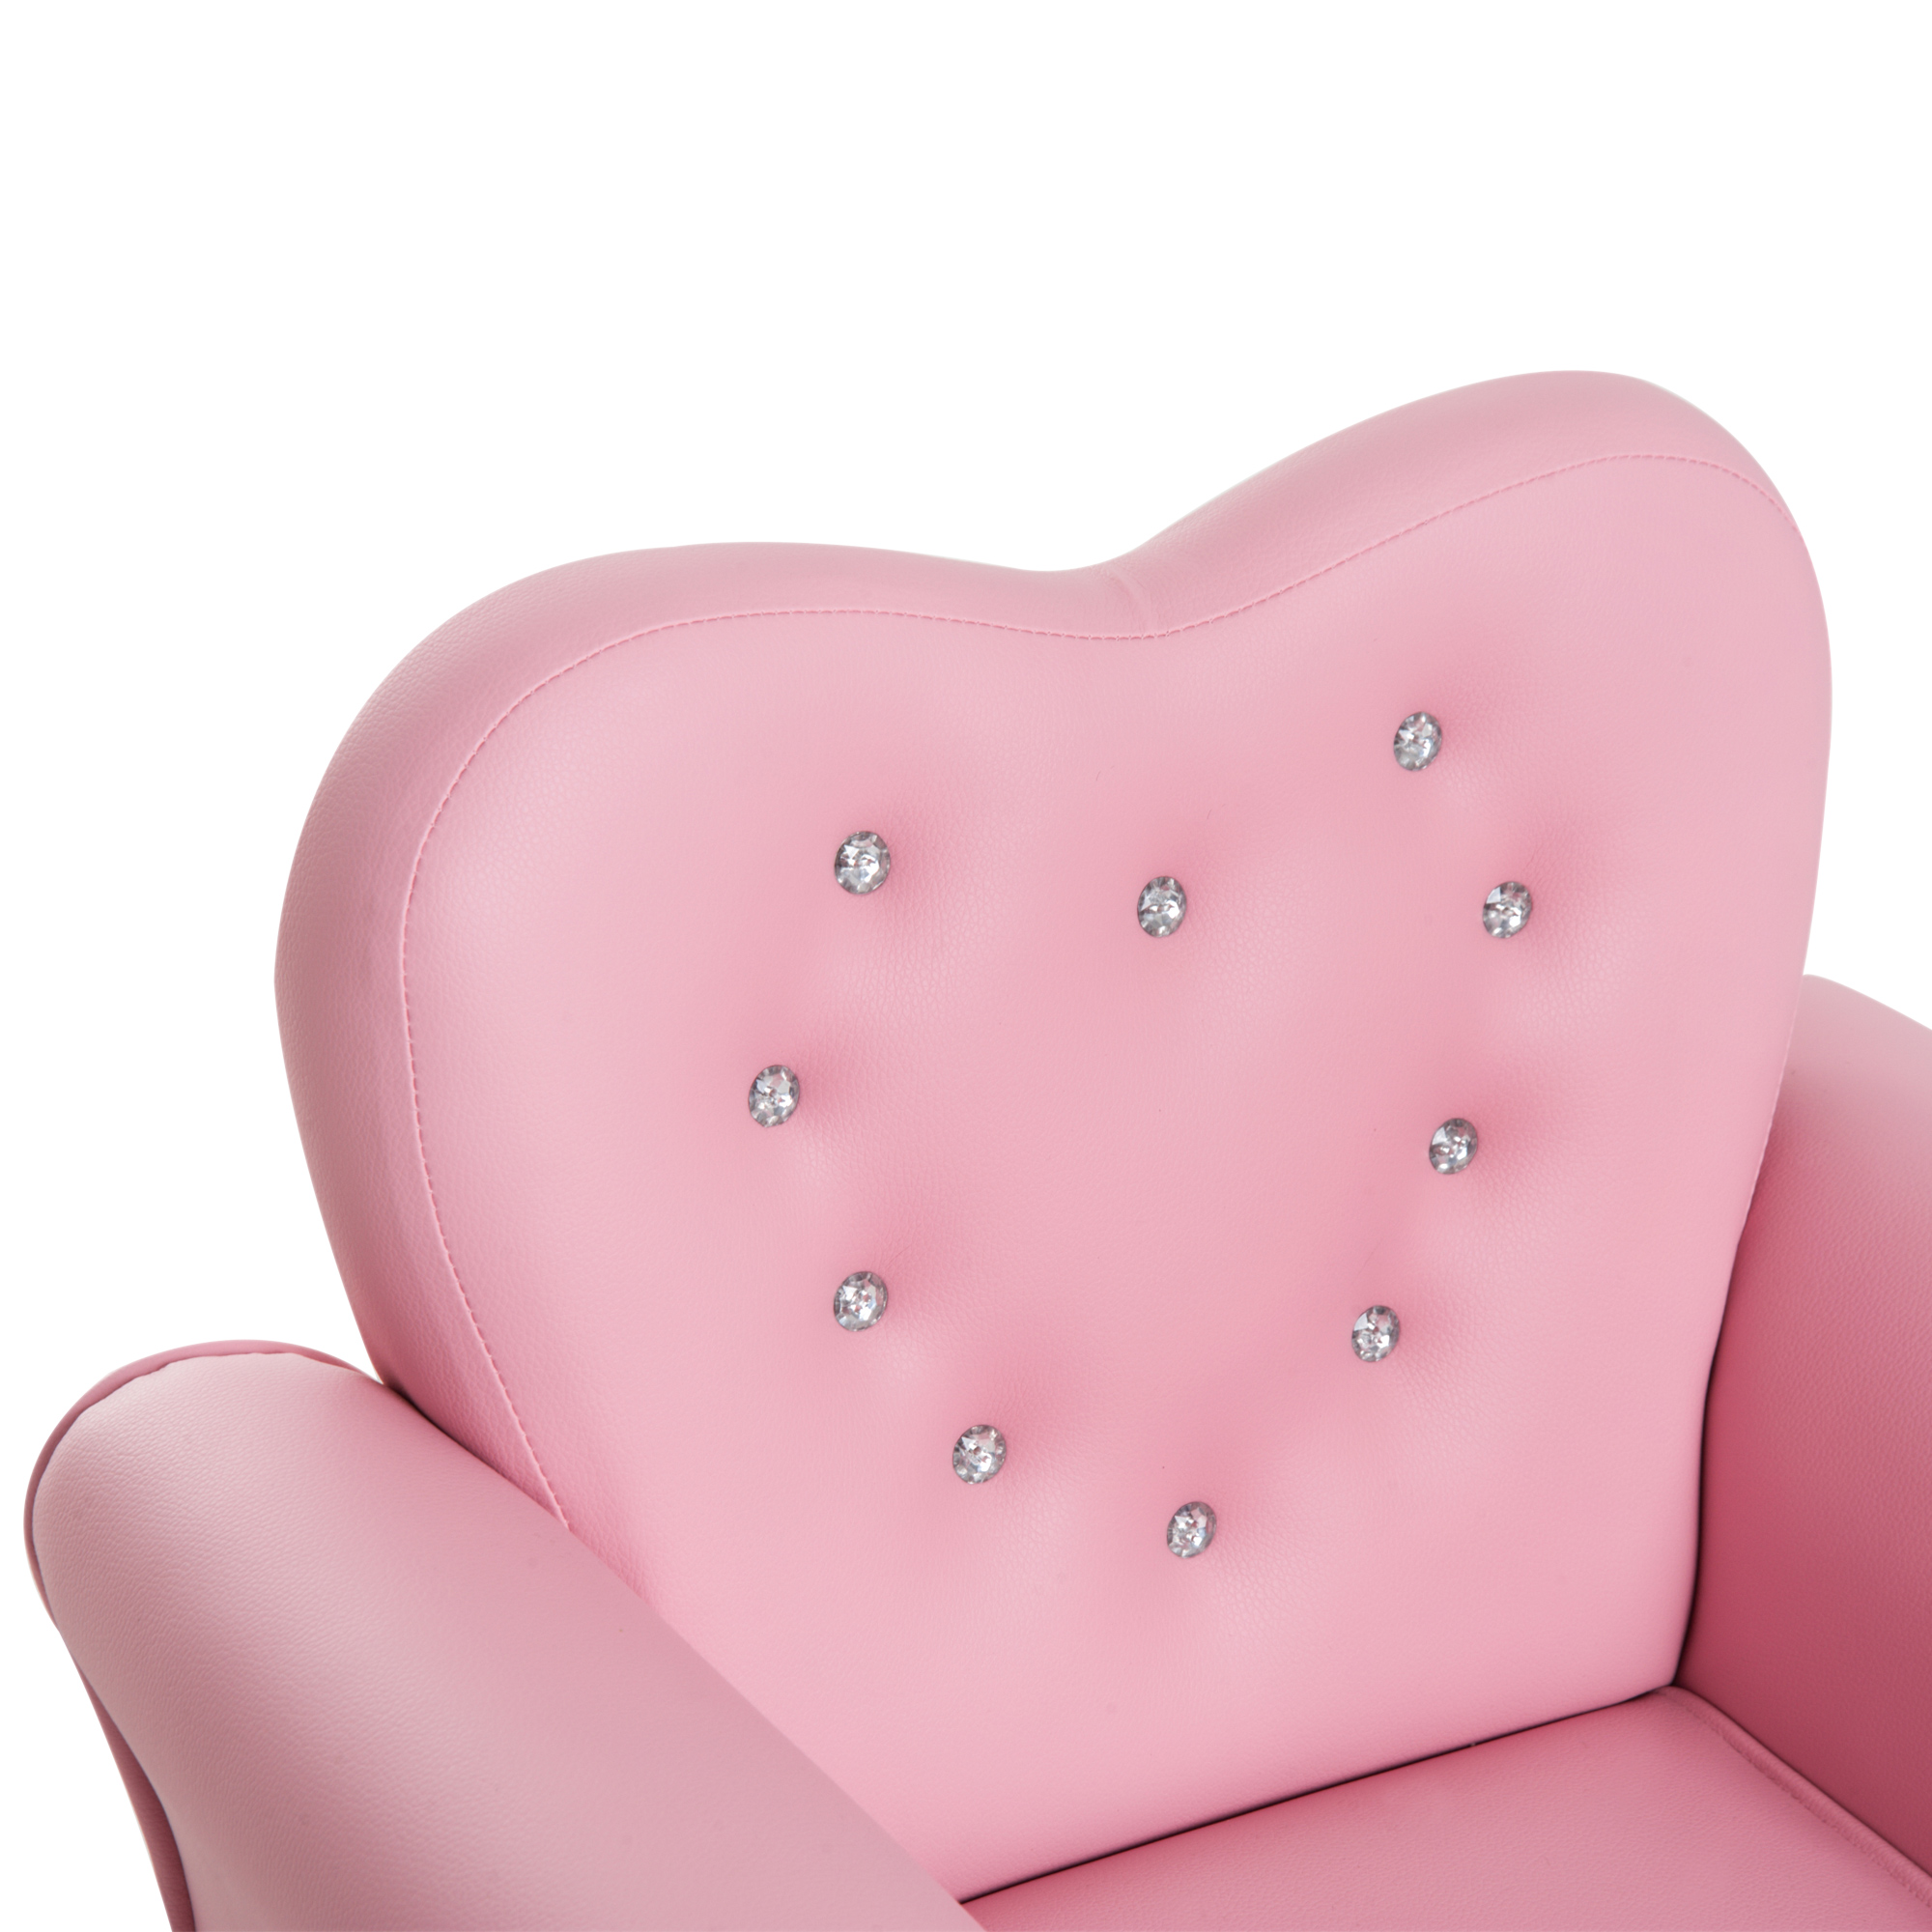 Qaba Kids Sofa Toddler Tufted Upholstered Sofa Chair Princess Couch Furniture with Diamond Decoration for Preschool Child, Pink - image 9 of 9